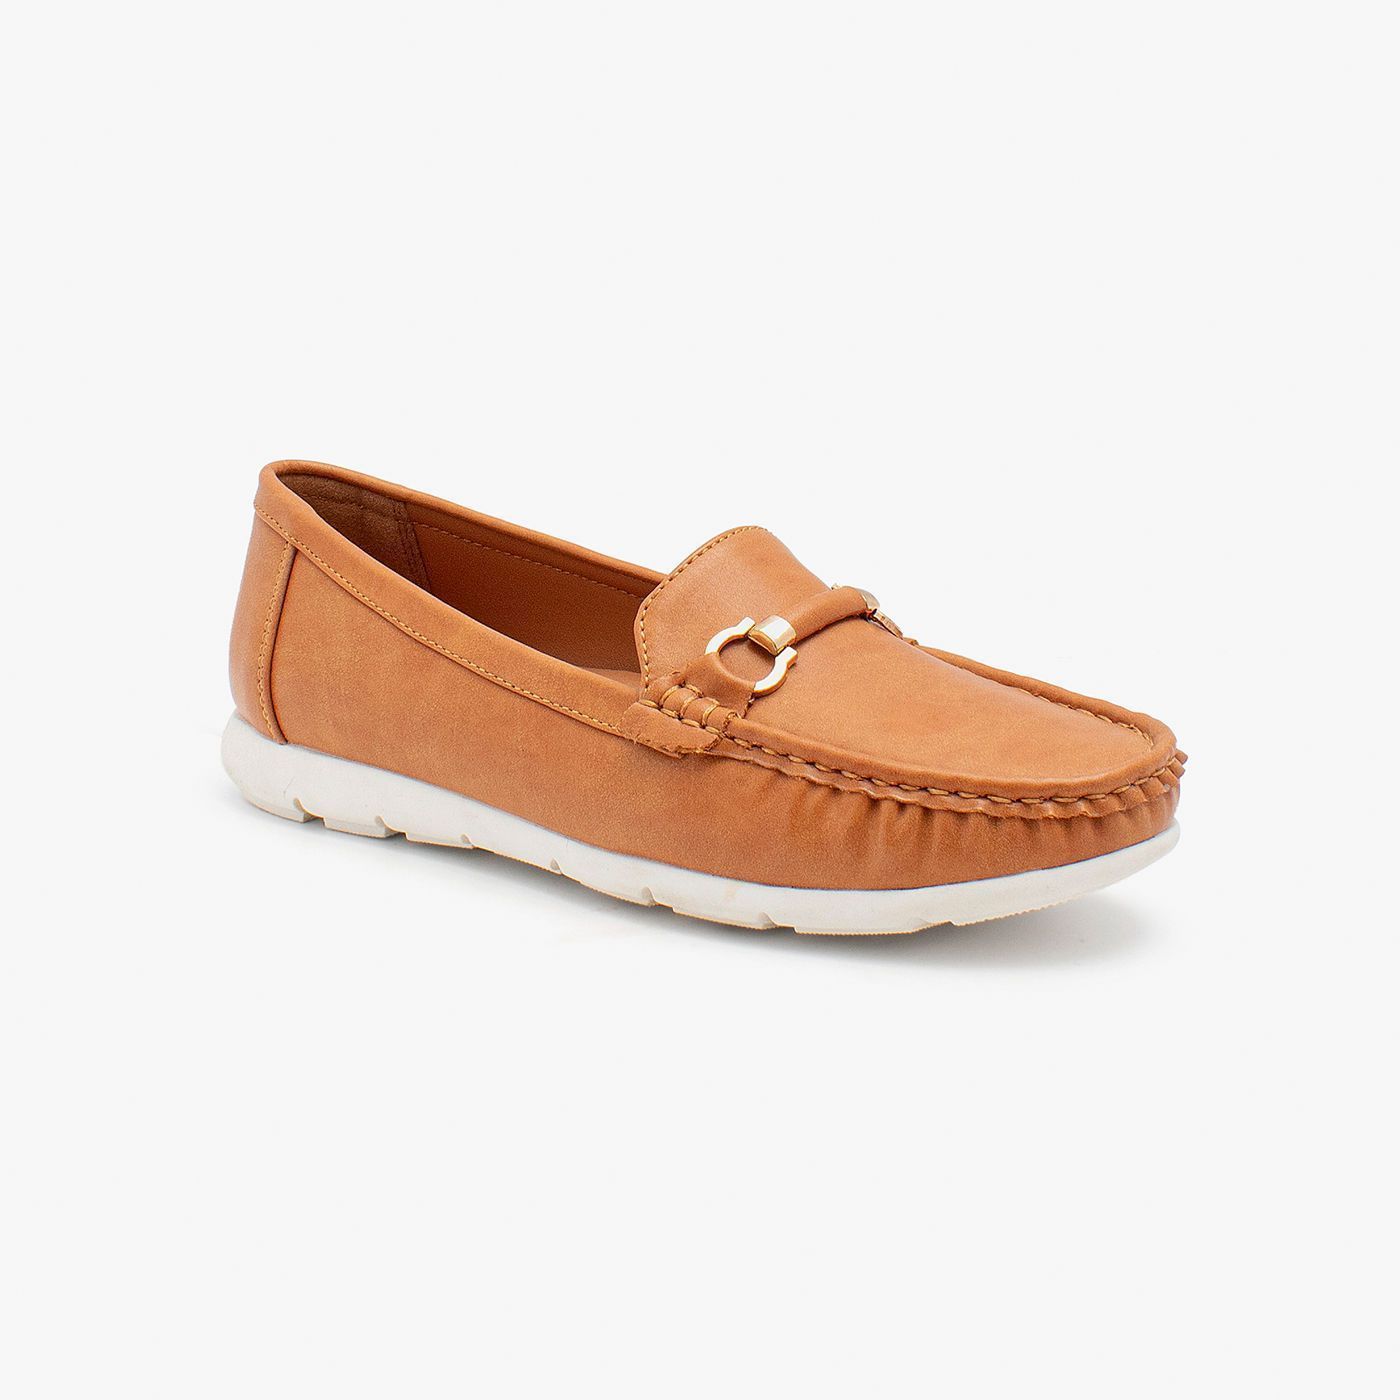 Buckled Ladies Loafers